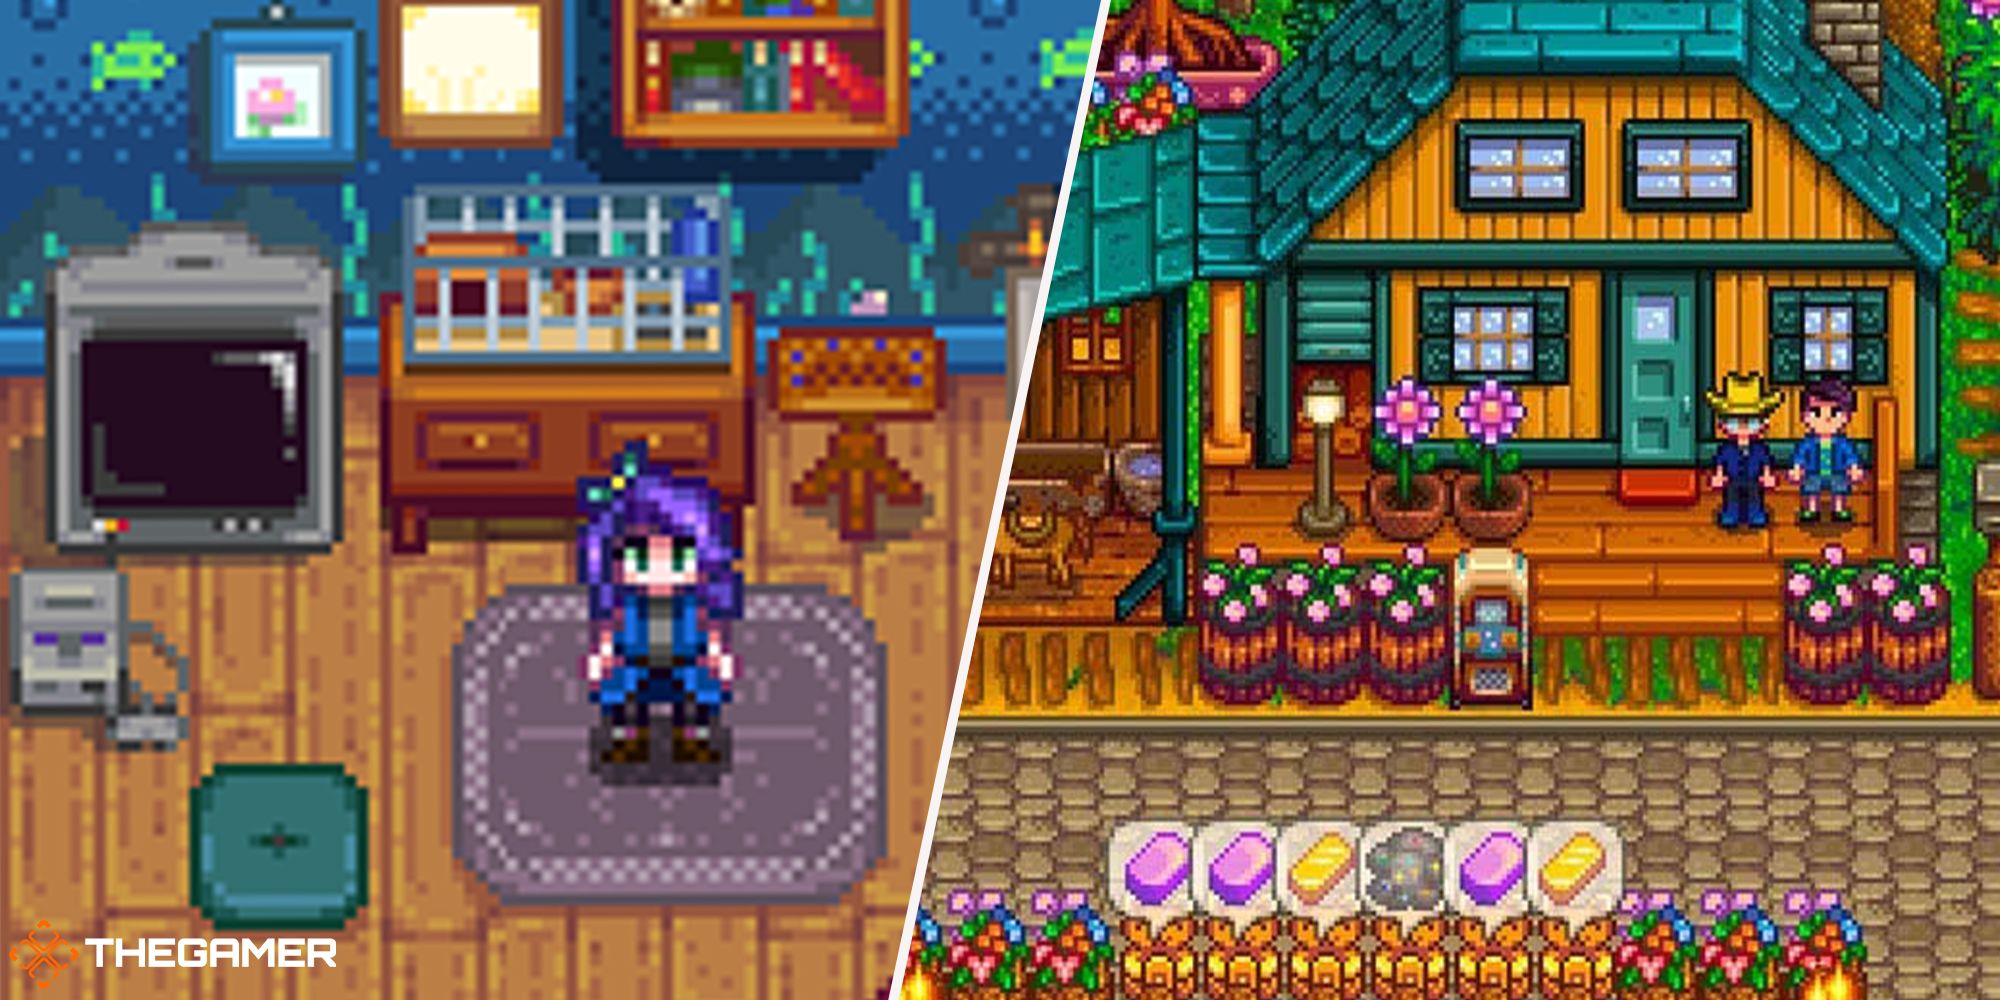 Stardew Valley - farm on right, abigail's spouse room on left